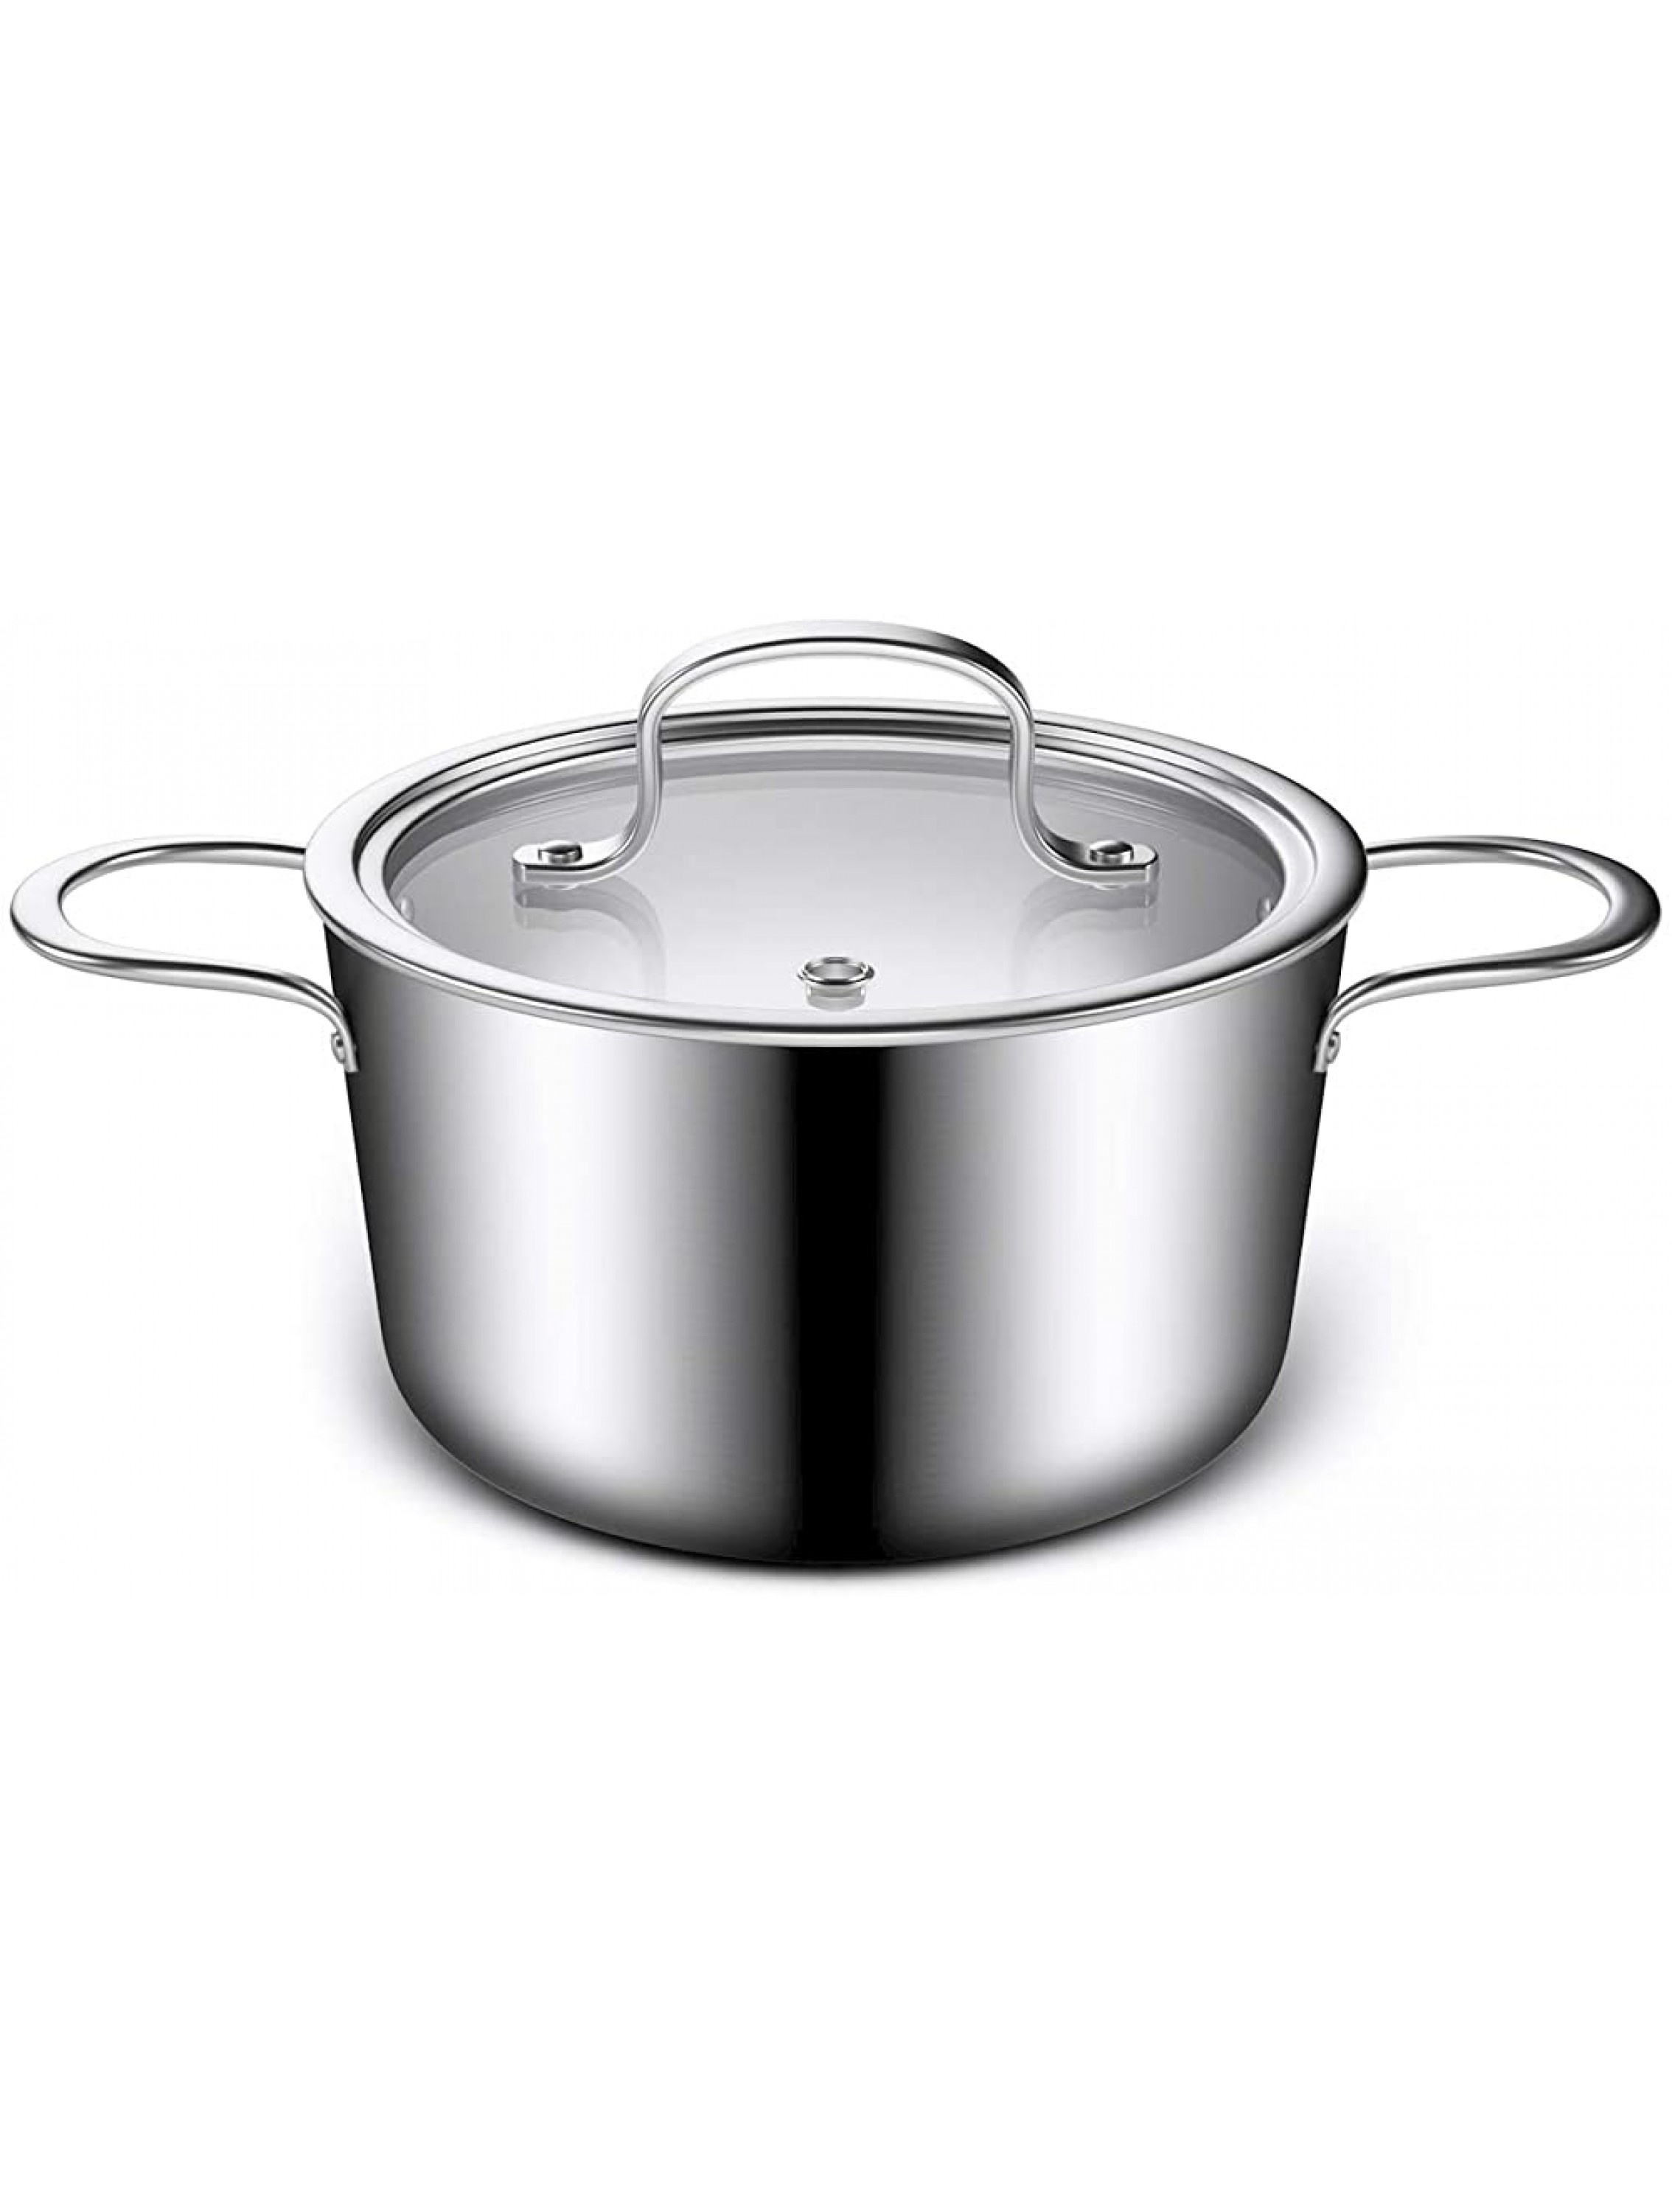 3 Quart tri-ply stainless steel induction cookware pot with glass lid stew cooking pot 3 Qt compatible with all heat sources oven dishwasher safe multipurpose use for home kitchen restaurant - BY93A4FXK